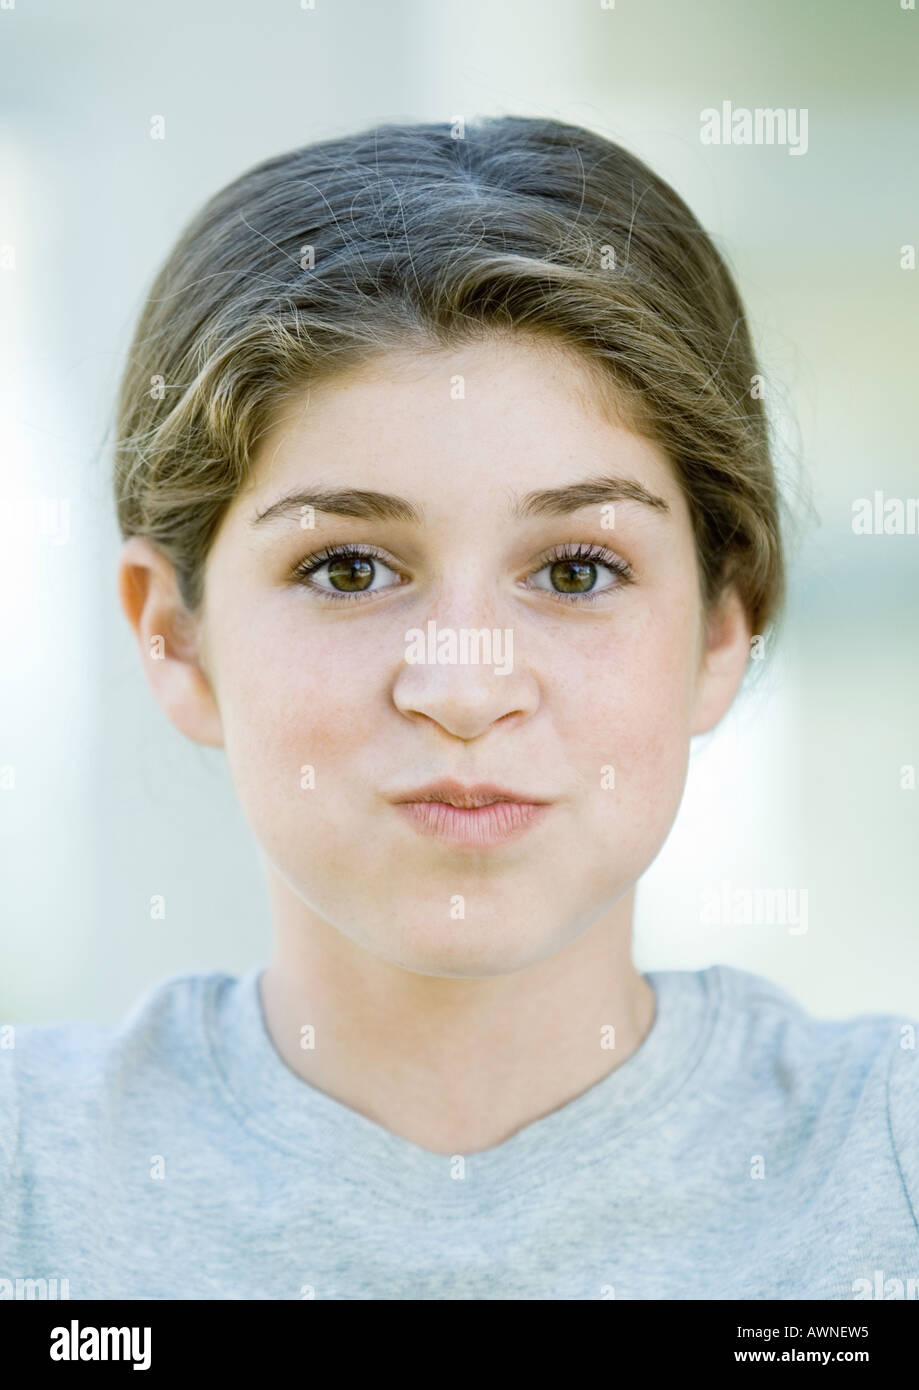 Preteen girl puffing out cheeks Stock Photo